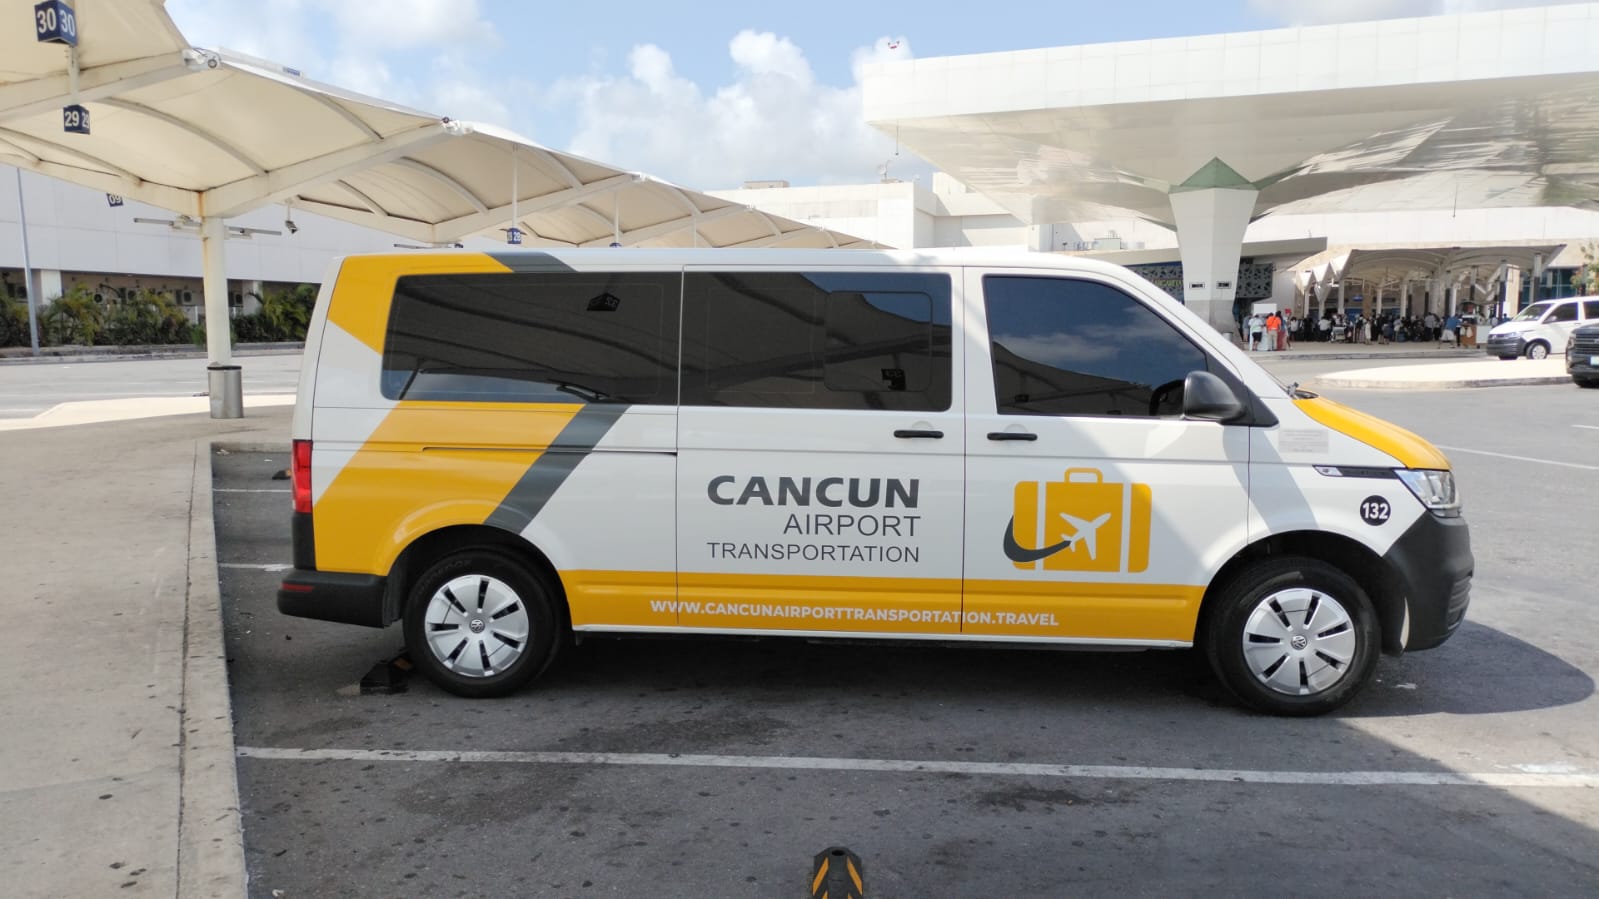 Cancun Airport to Tulum with Cancun Airport Transportation